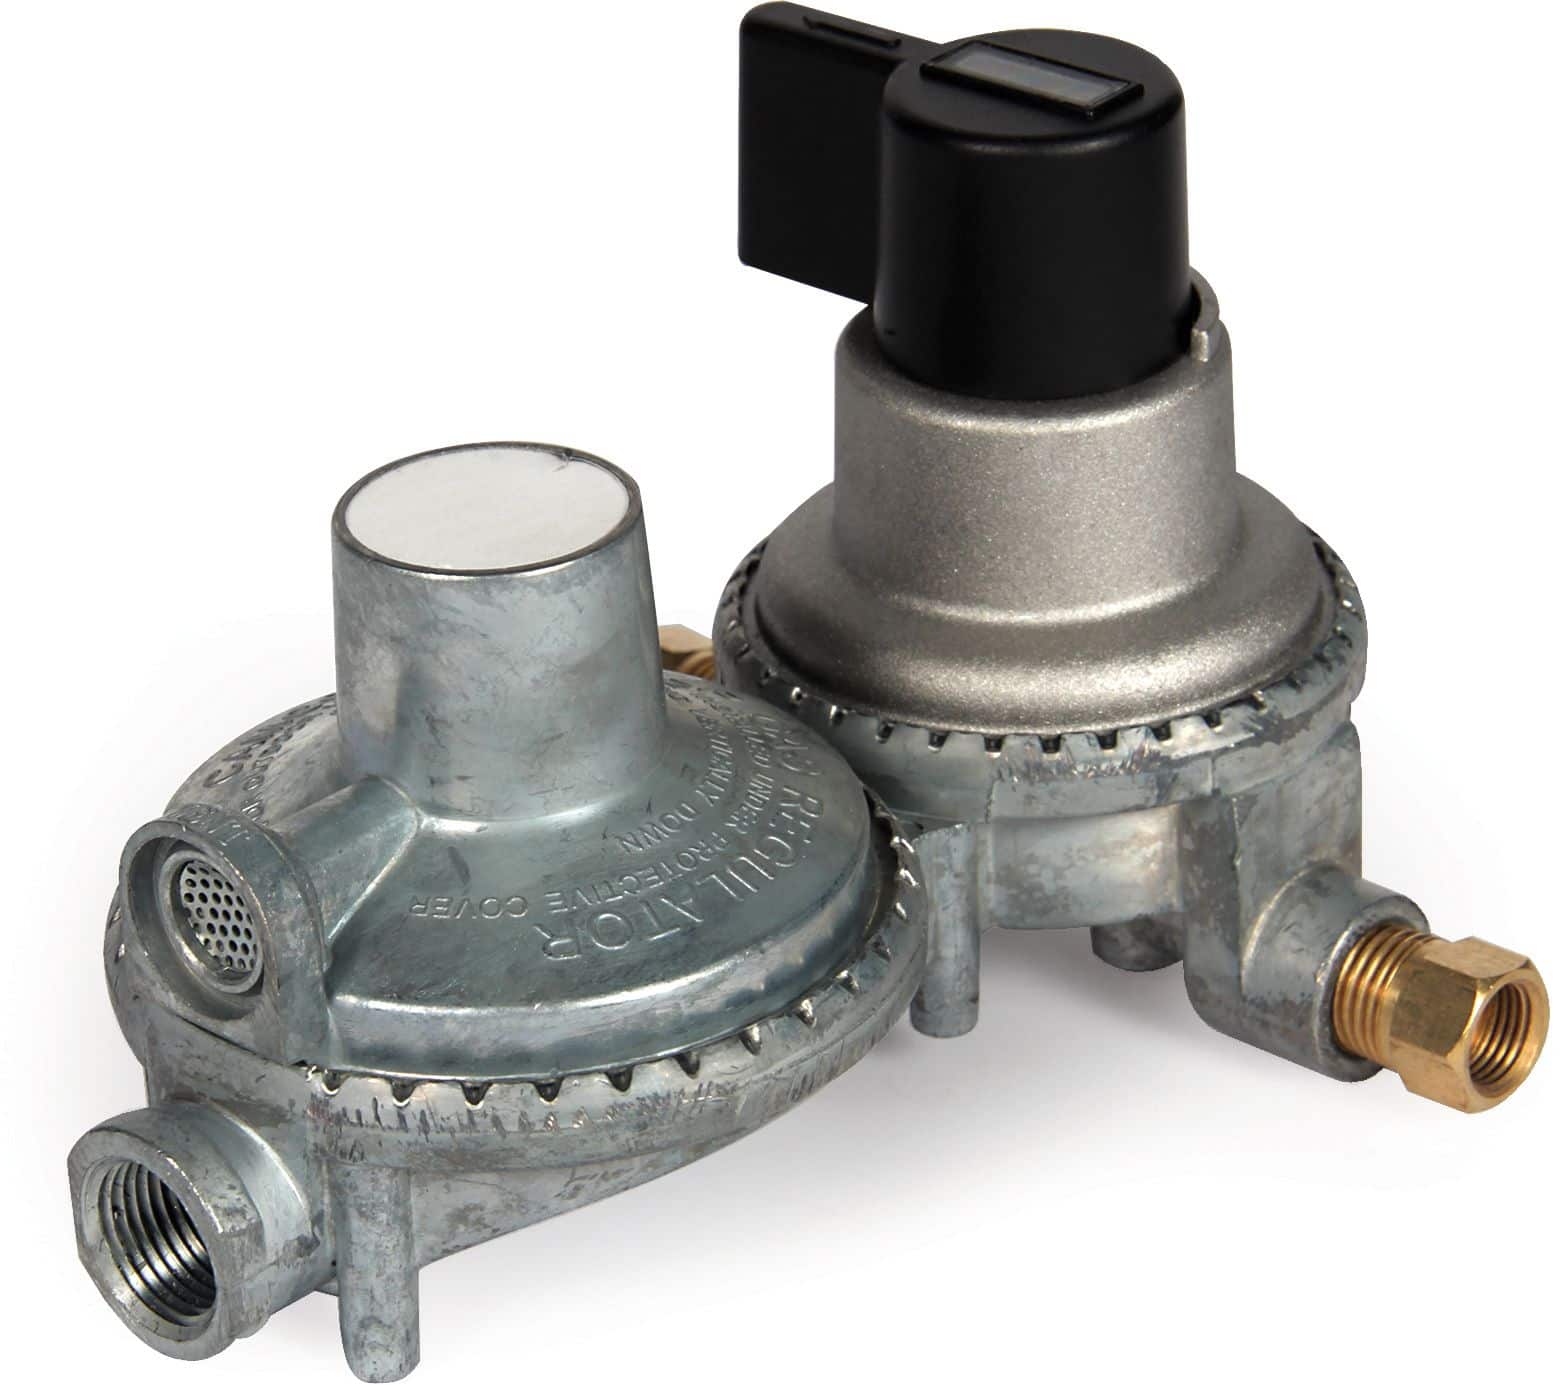 What are the Common Types of Propane Fittings Used on RVs